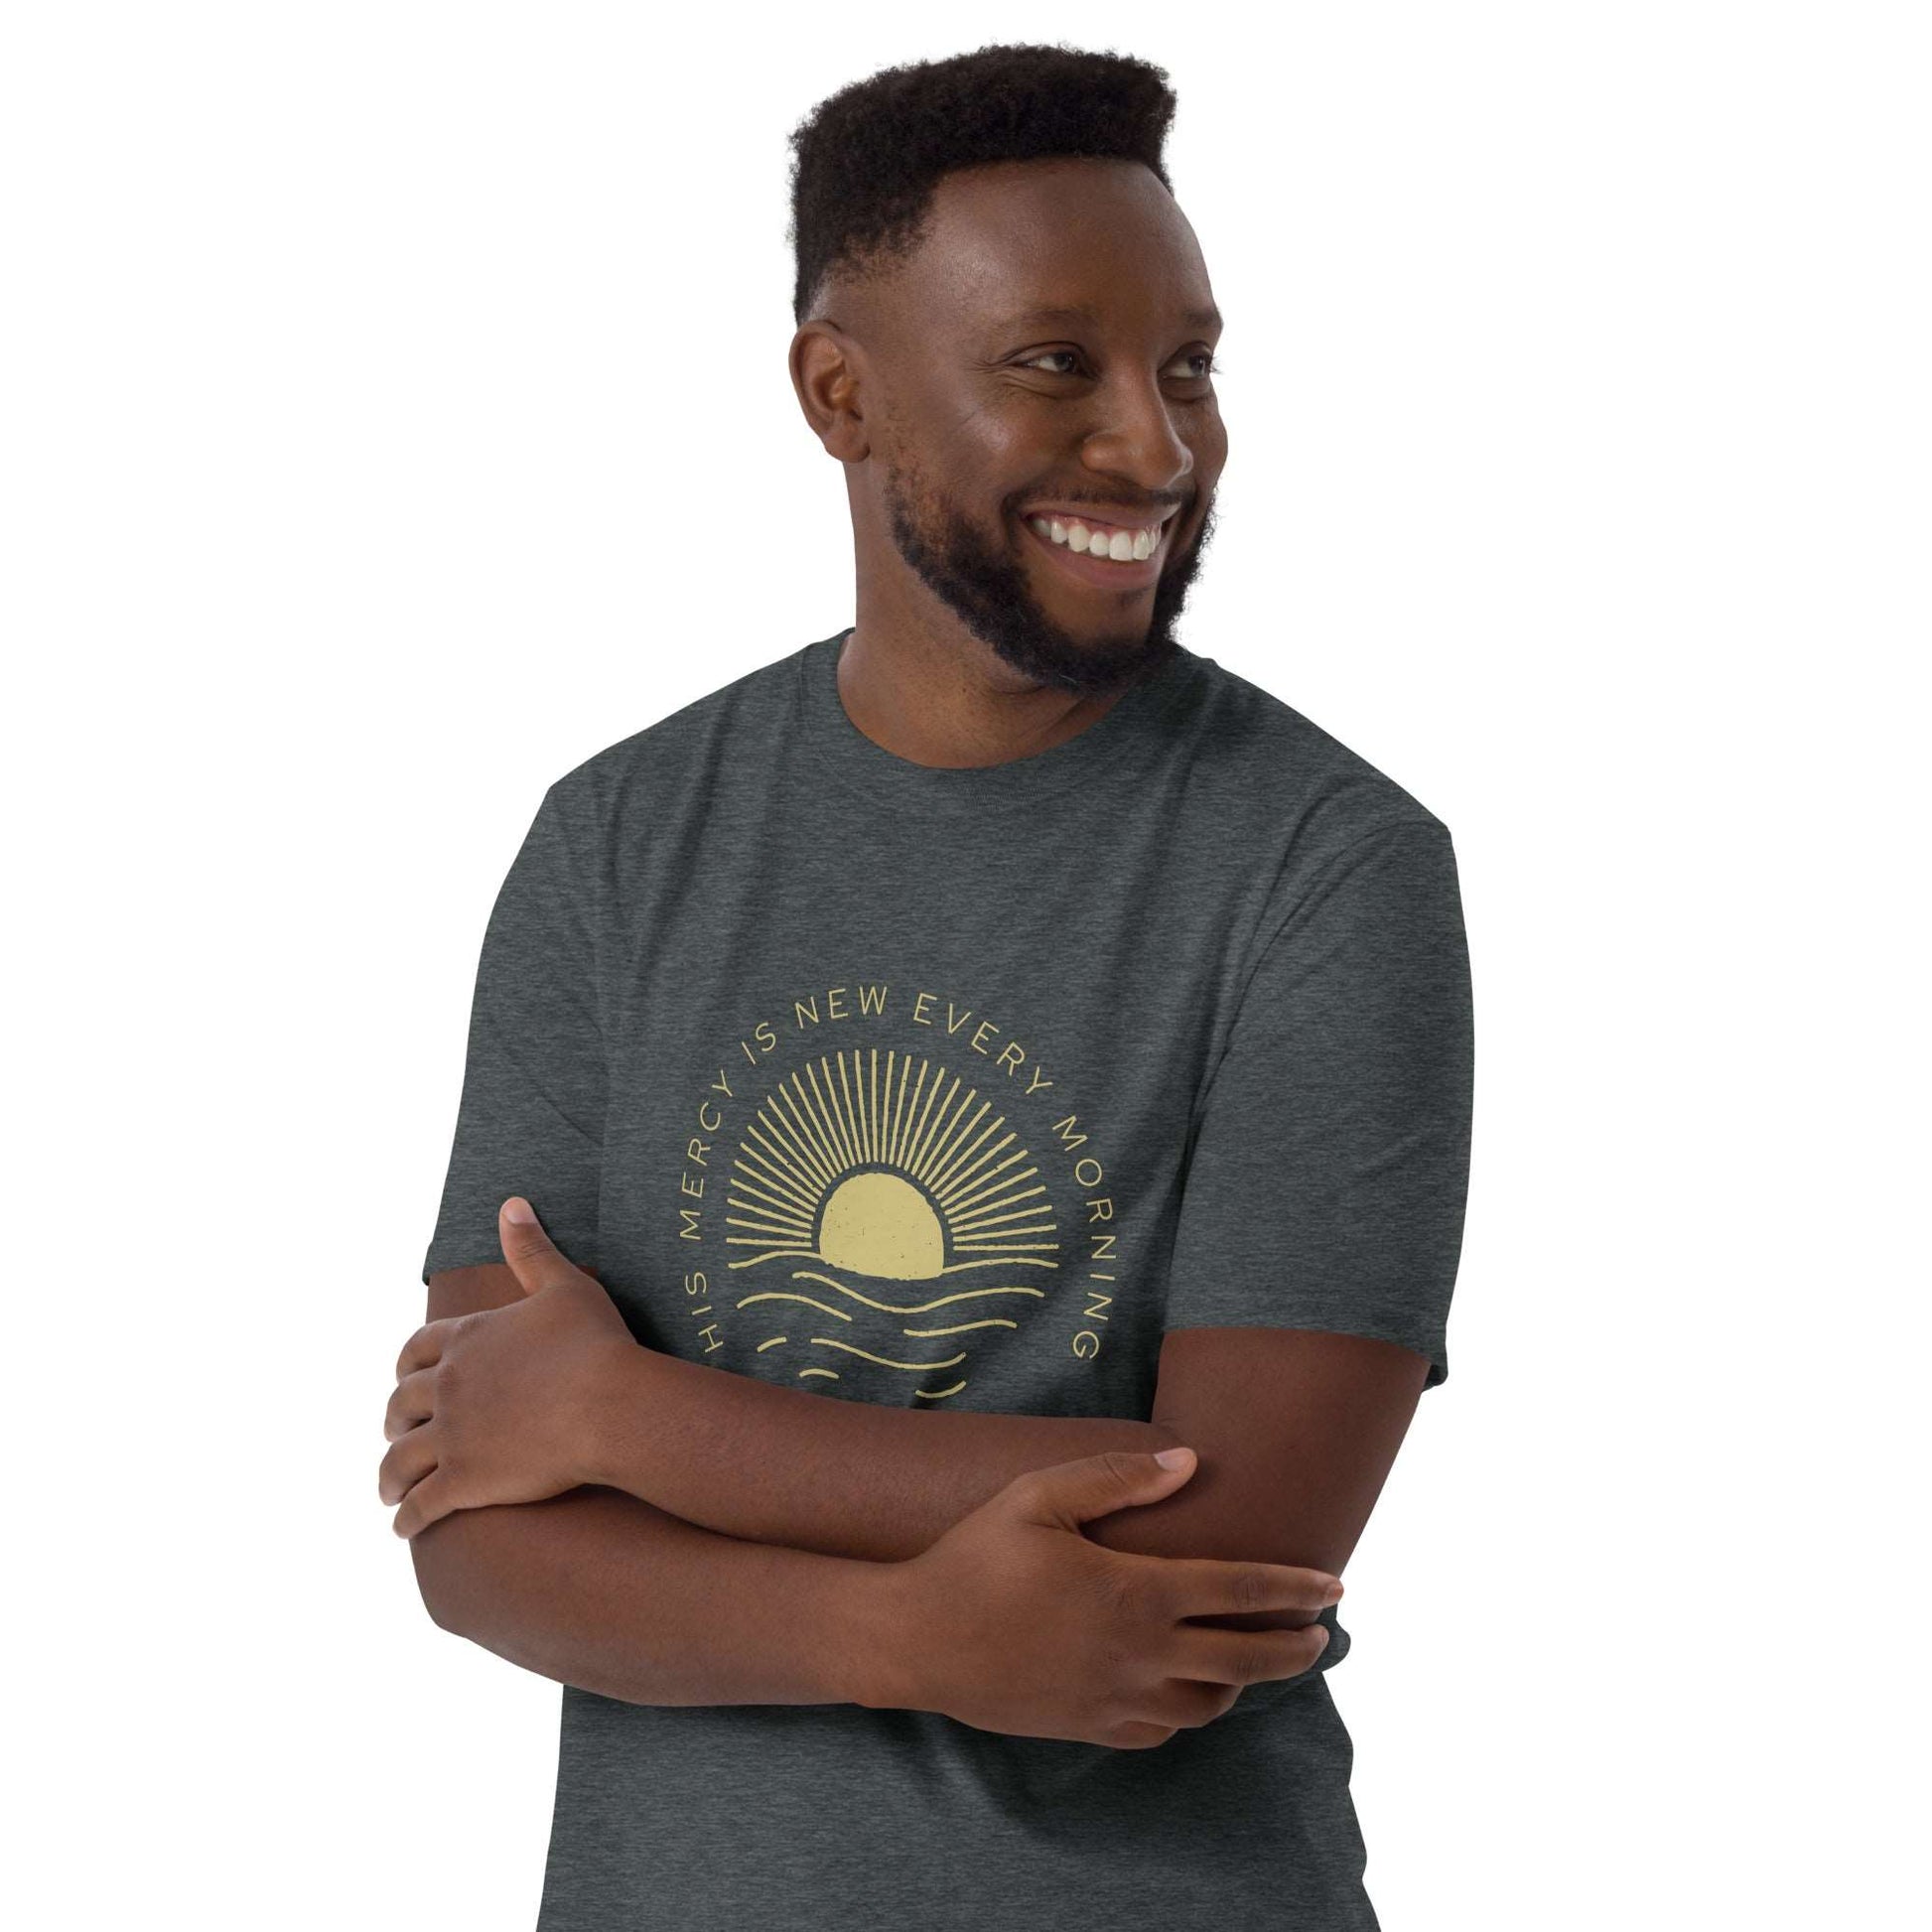 Short-Sleeve Unisex T-Shirt - His Mercy Is New